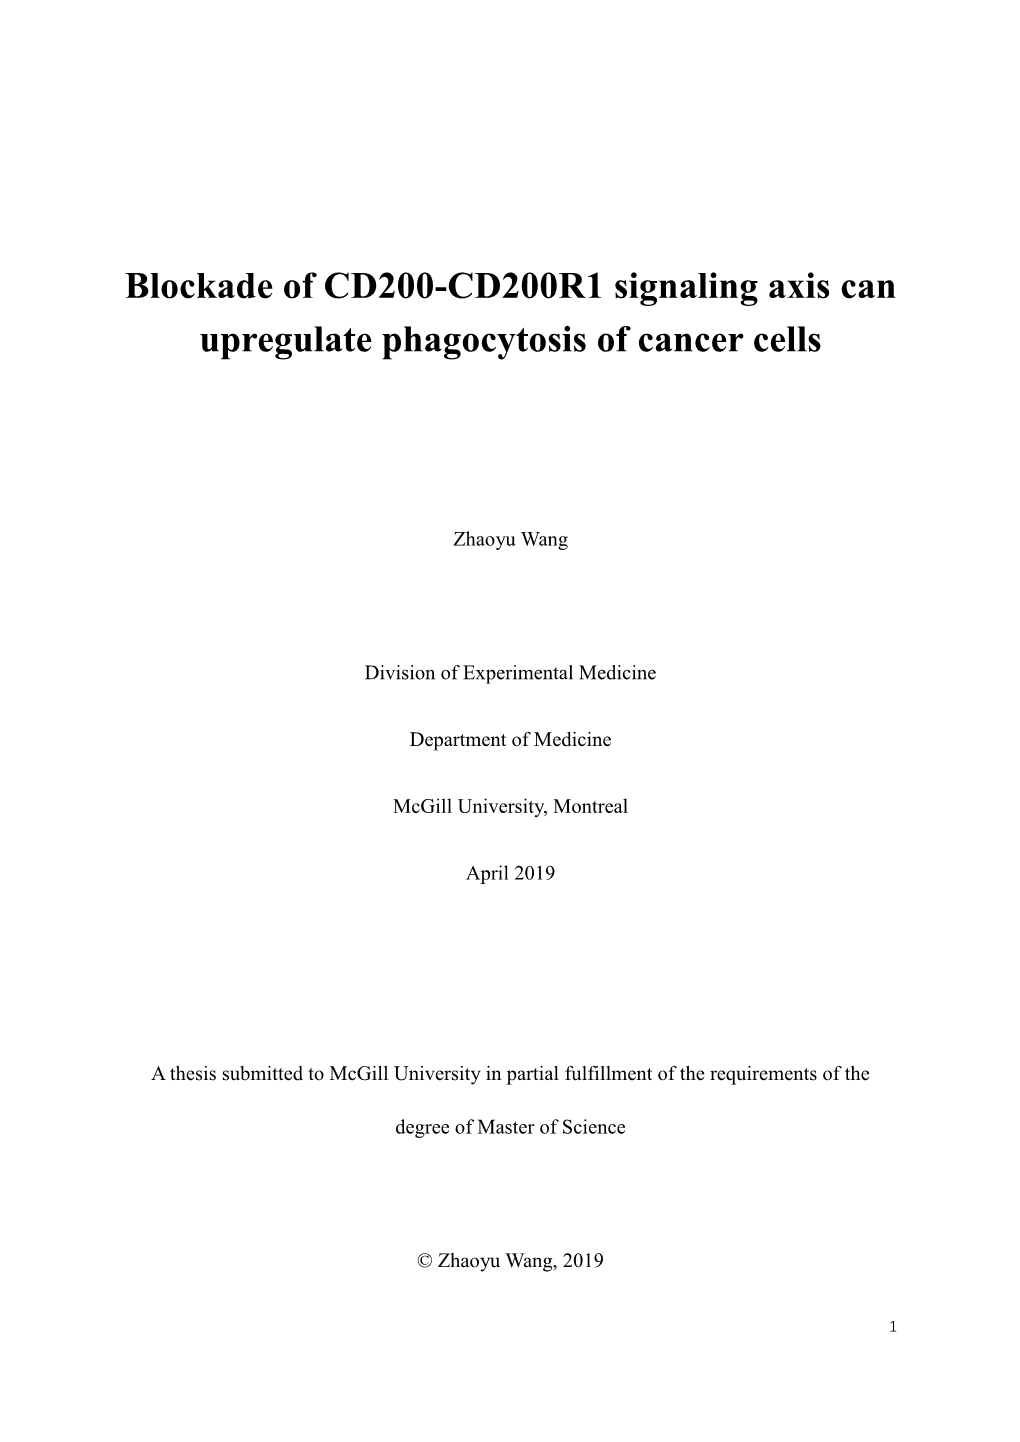 Blockade of CD200-CD200R1 Signaling Axis Can Upregulate Phagocytosis of Cancer Cells